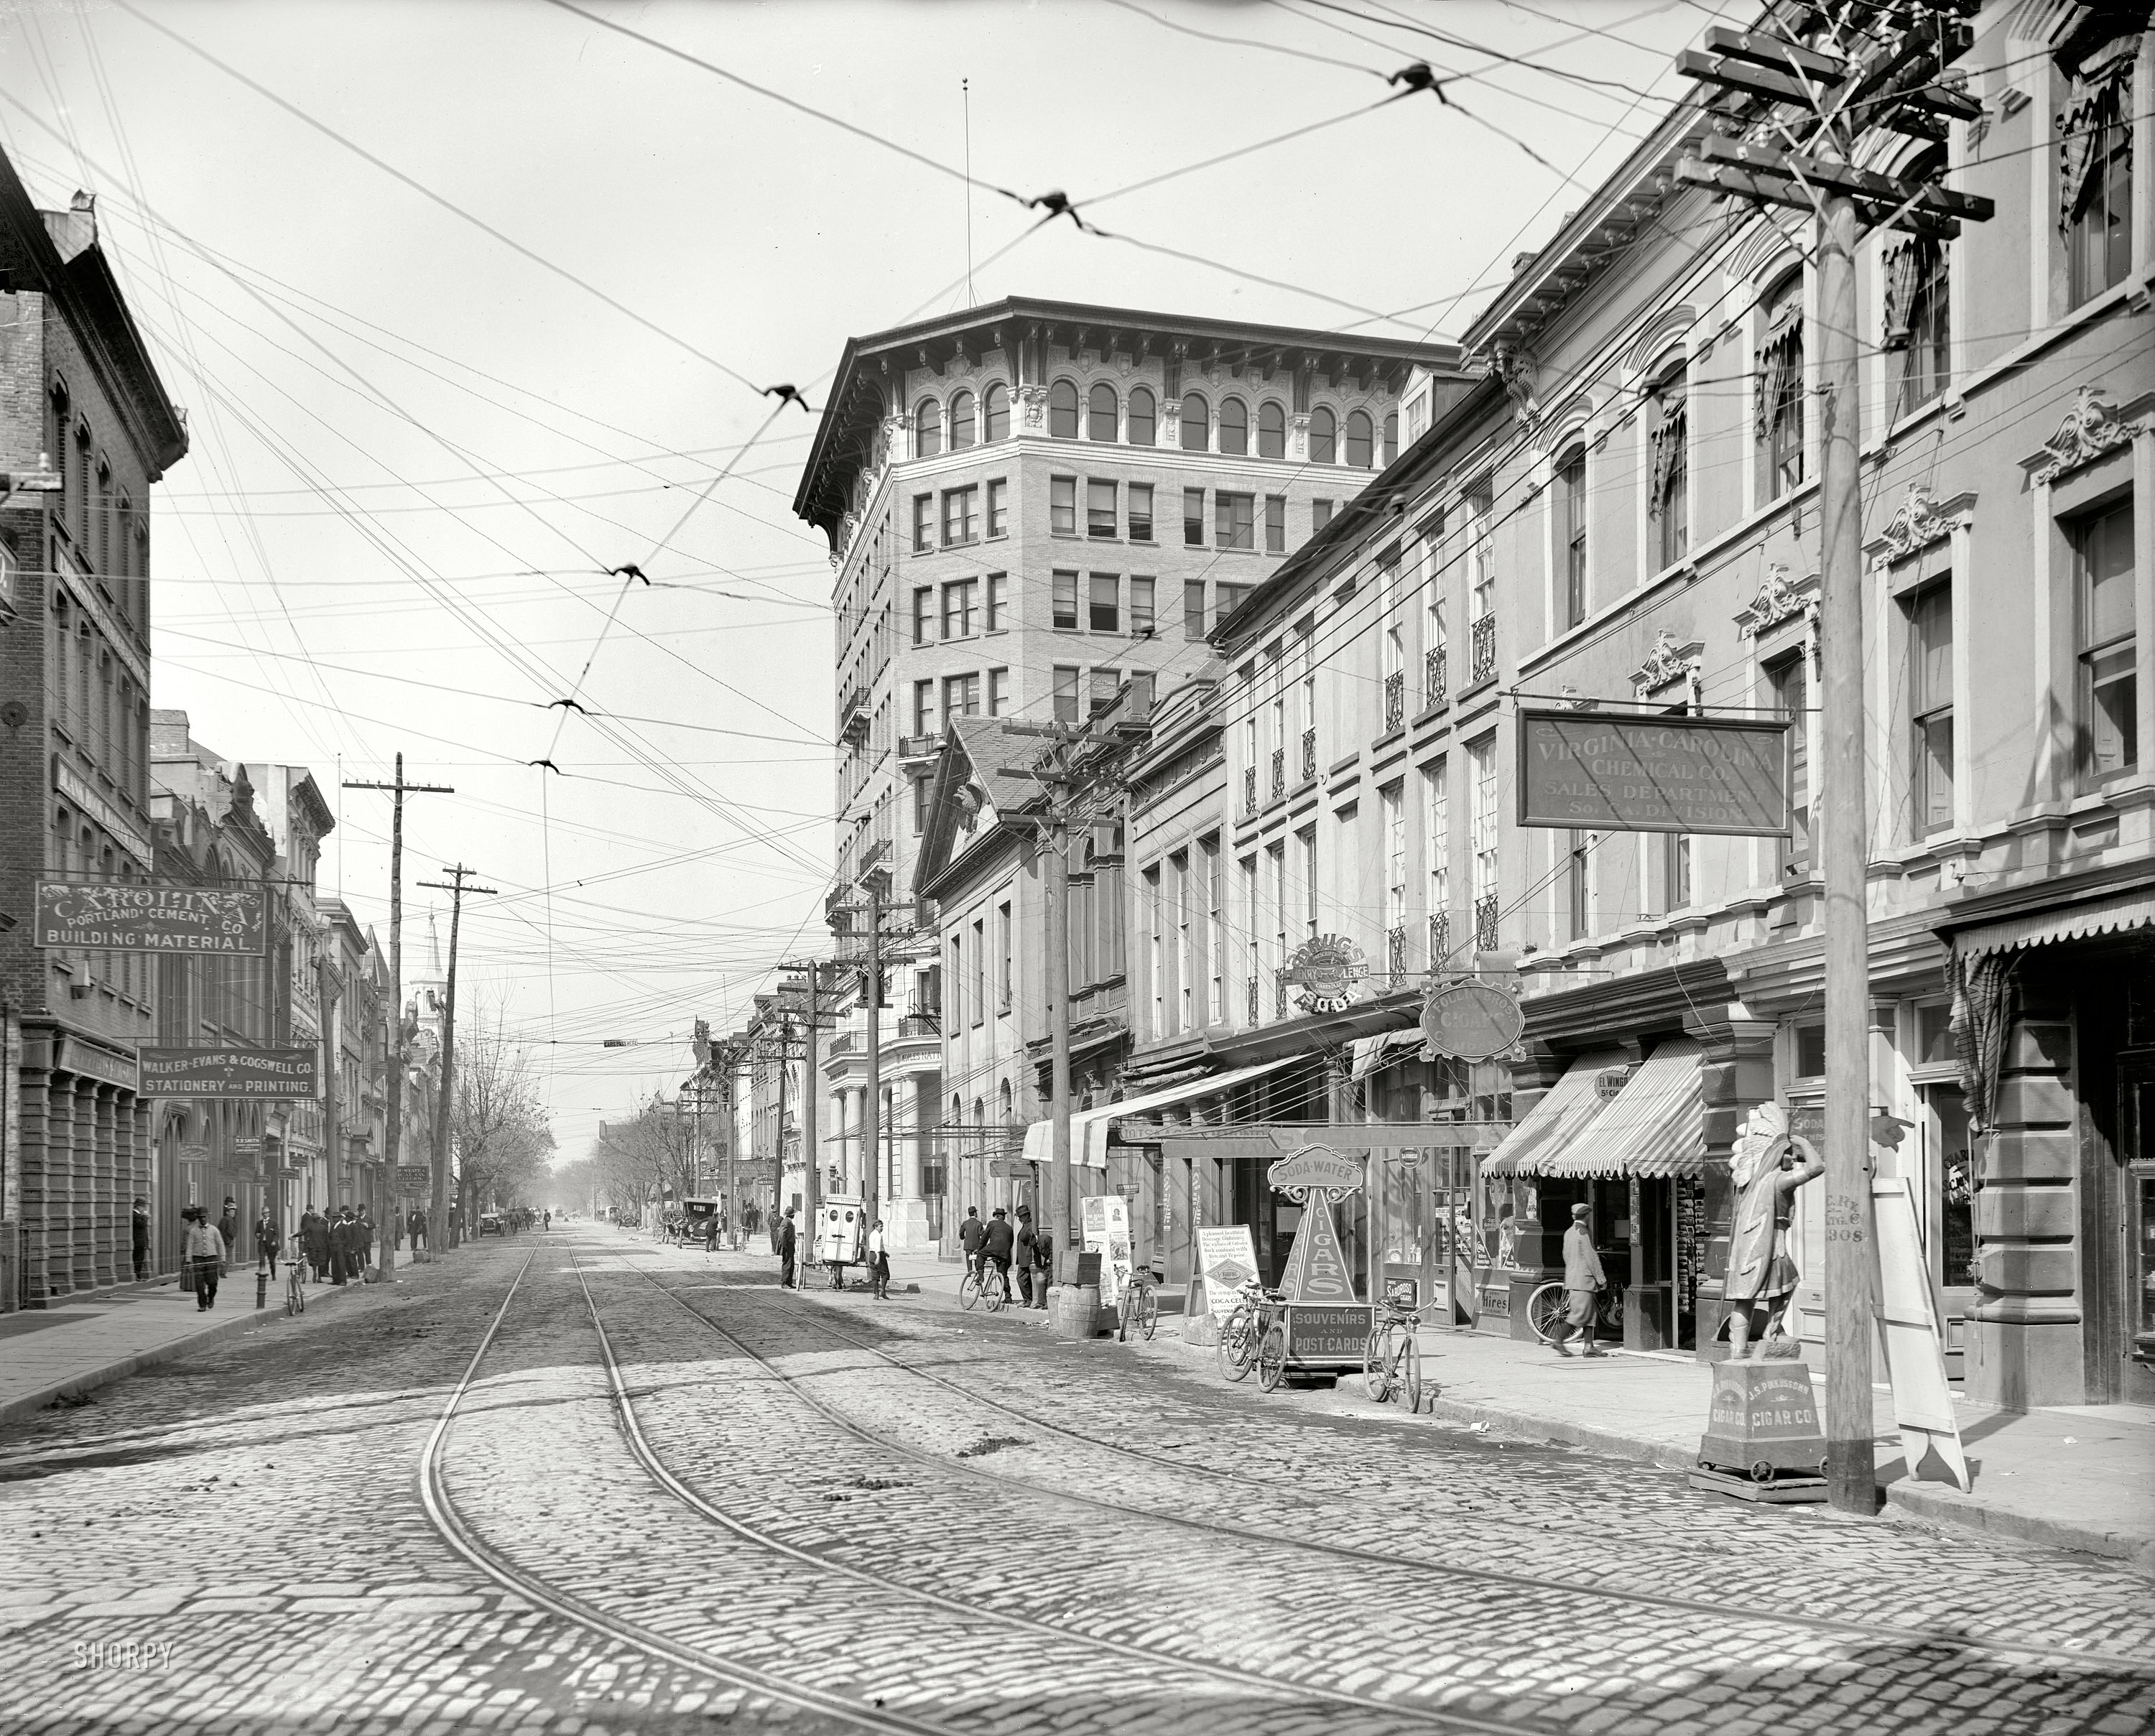 Charleston, South Carolina, circa 1911. "Broad Street looking west." 8x10 inch dry plate glass negative, Detroit Publishing Company. View full size.